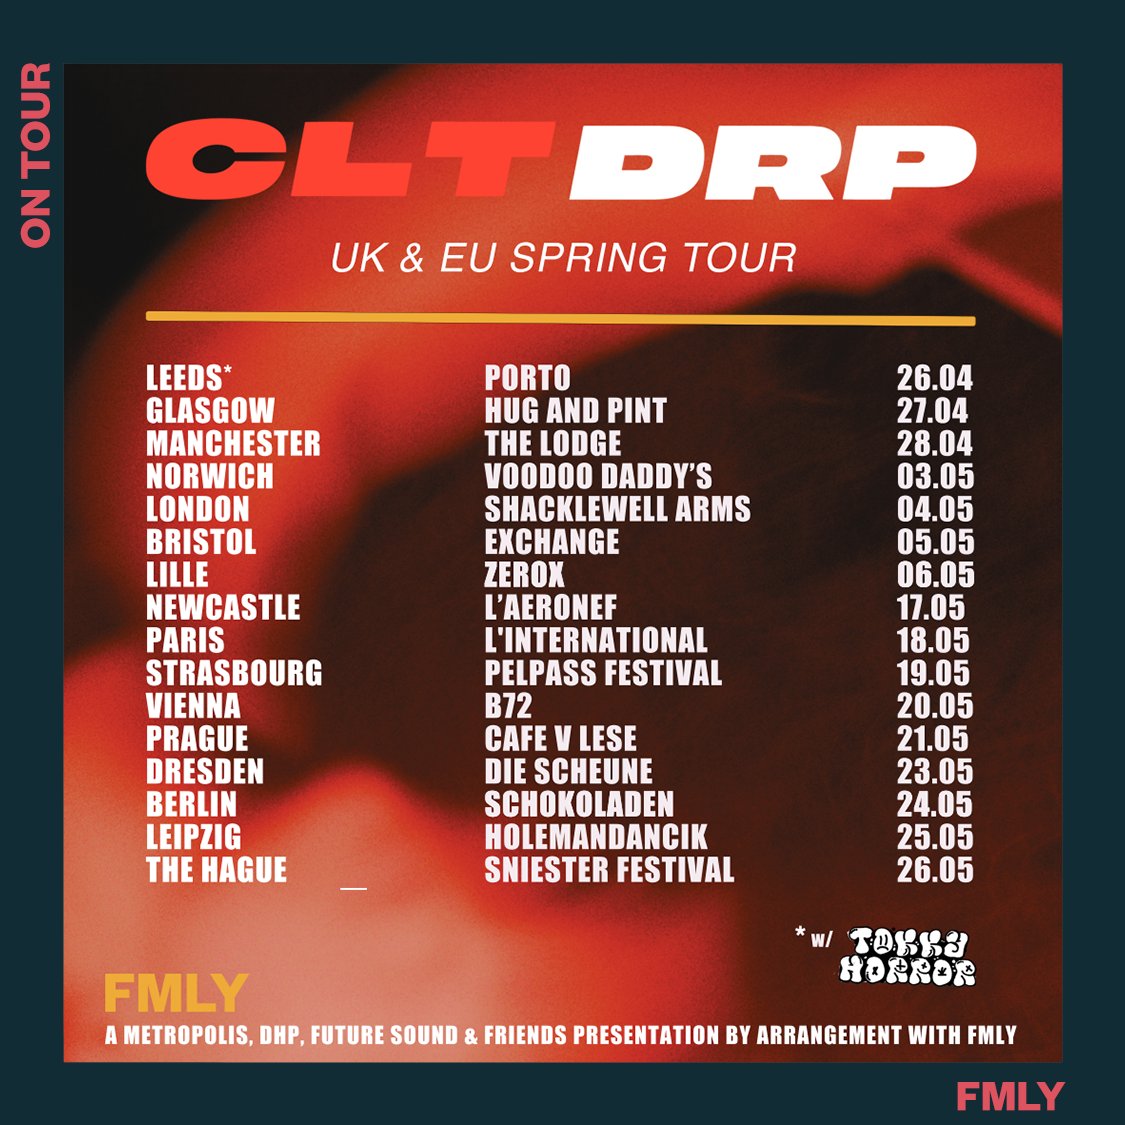 Live mavericks @CLTDRP announce their UK and European tour dates for this Spring. You do not want to miss these guys in action, get your tickets now (via 🔗 in bio) for some electro-punk madness played LOUD.⁠ @liquidmgmt